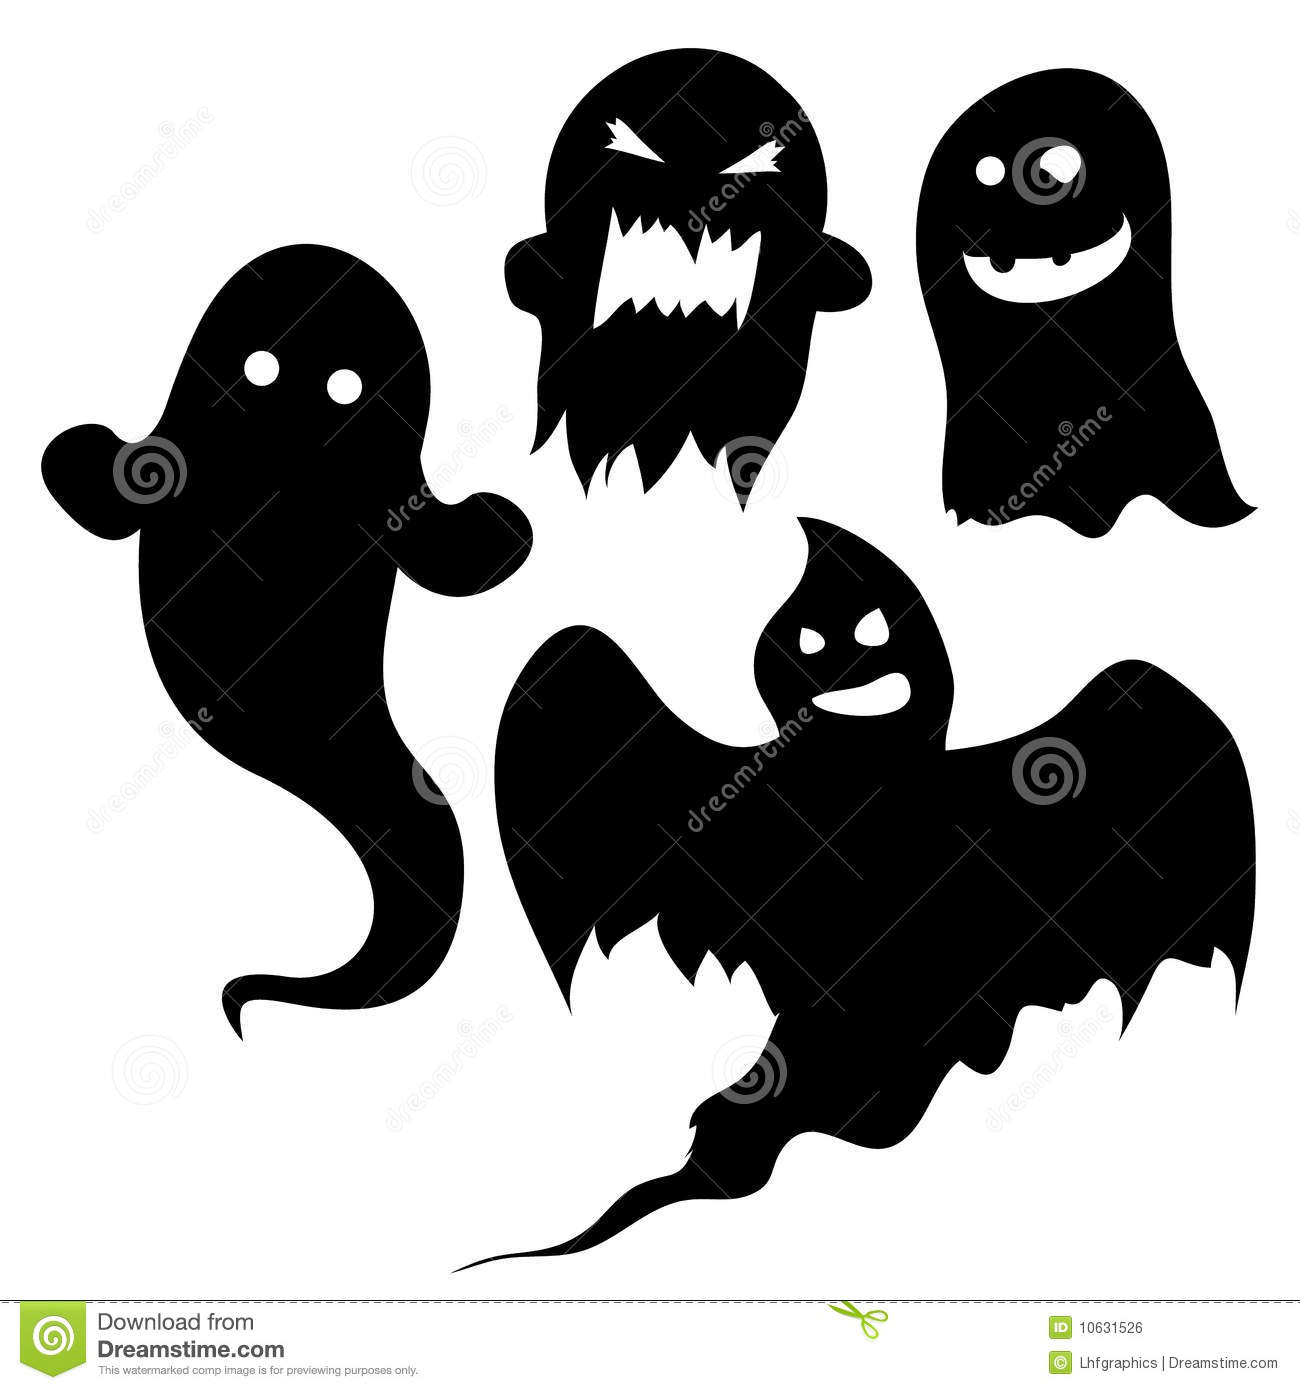 Scary Ghost Silhouettes Royalty Free Stock Image   Image  10631526